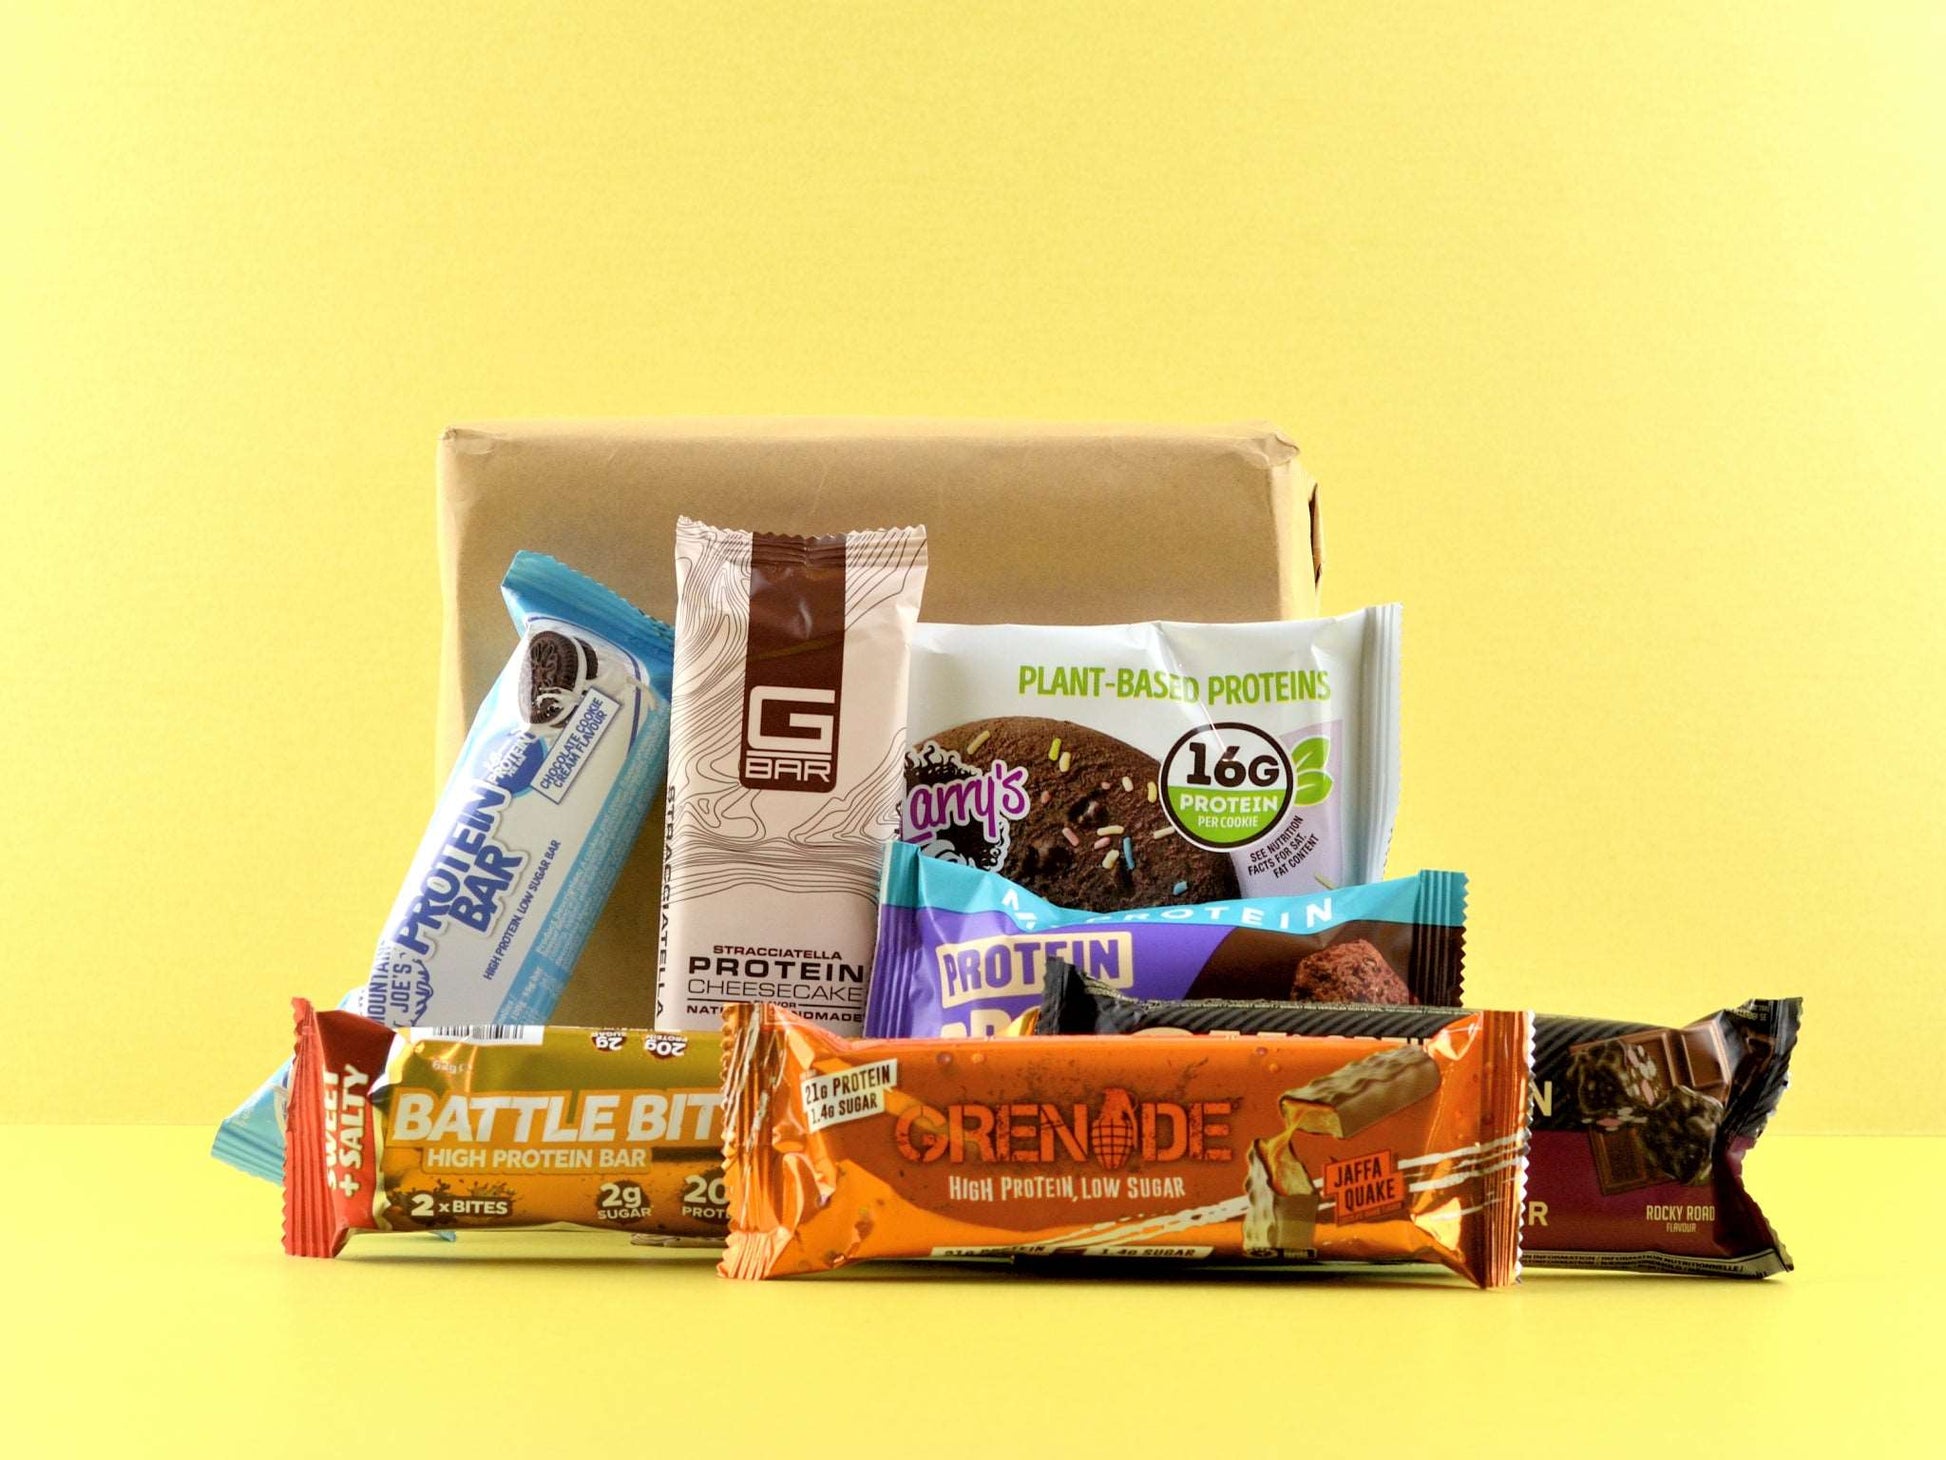 Box Of Protein | Protein Subscription Box | Lifestyle Subscription Boxes | Protein Snacks Hamper | Grenade, Optimum Nutrition, Lenny & Larry, G Bar, MyProtein, Battle Bites, Mountain Joes